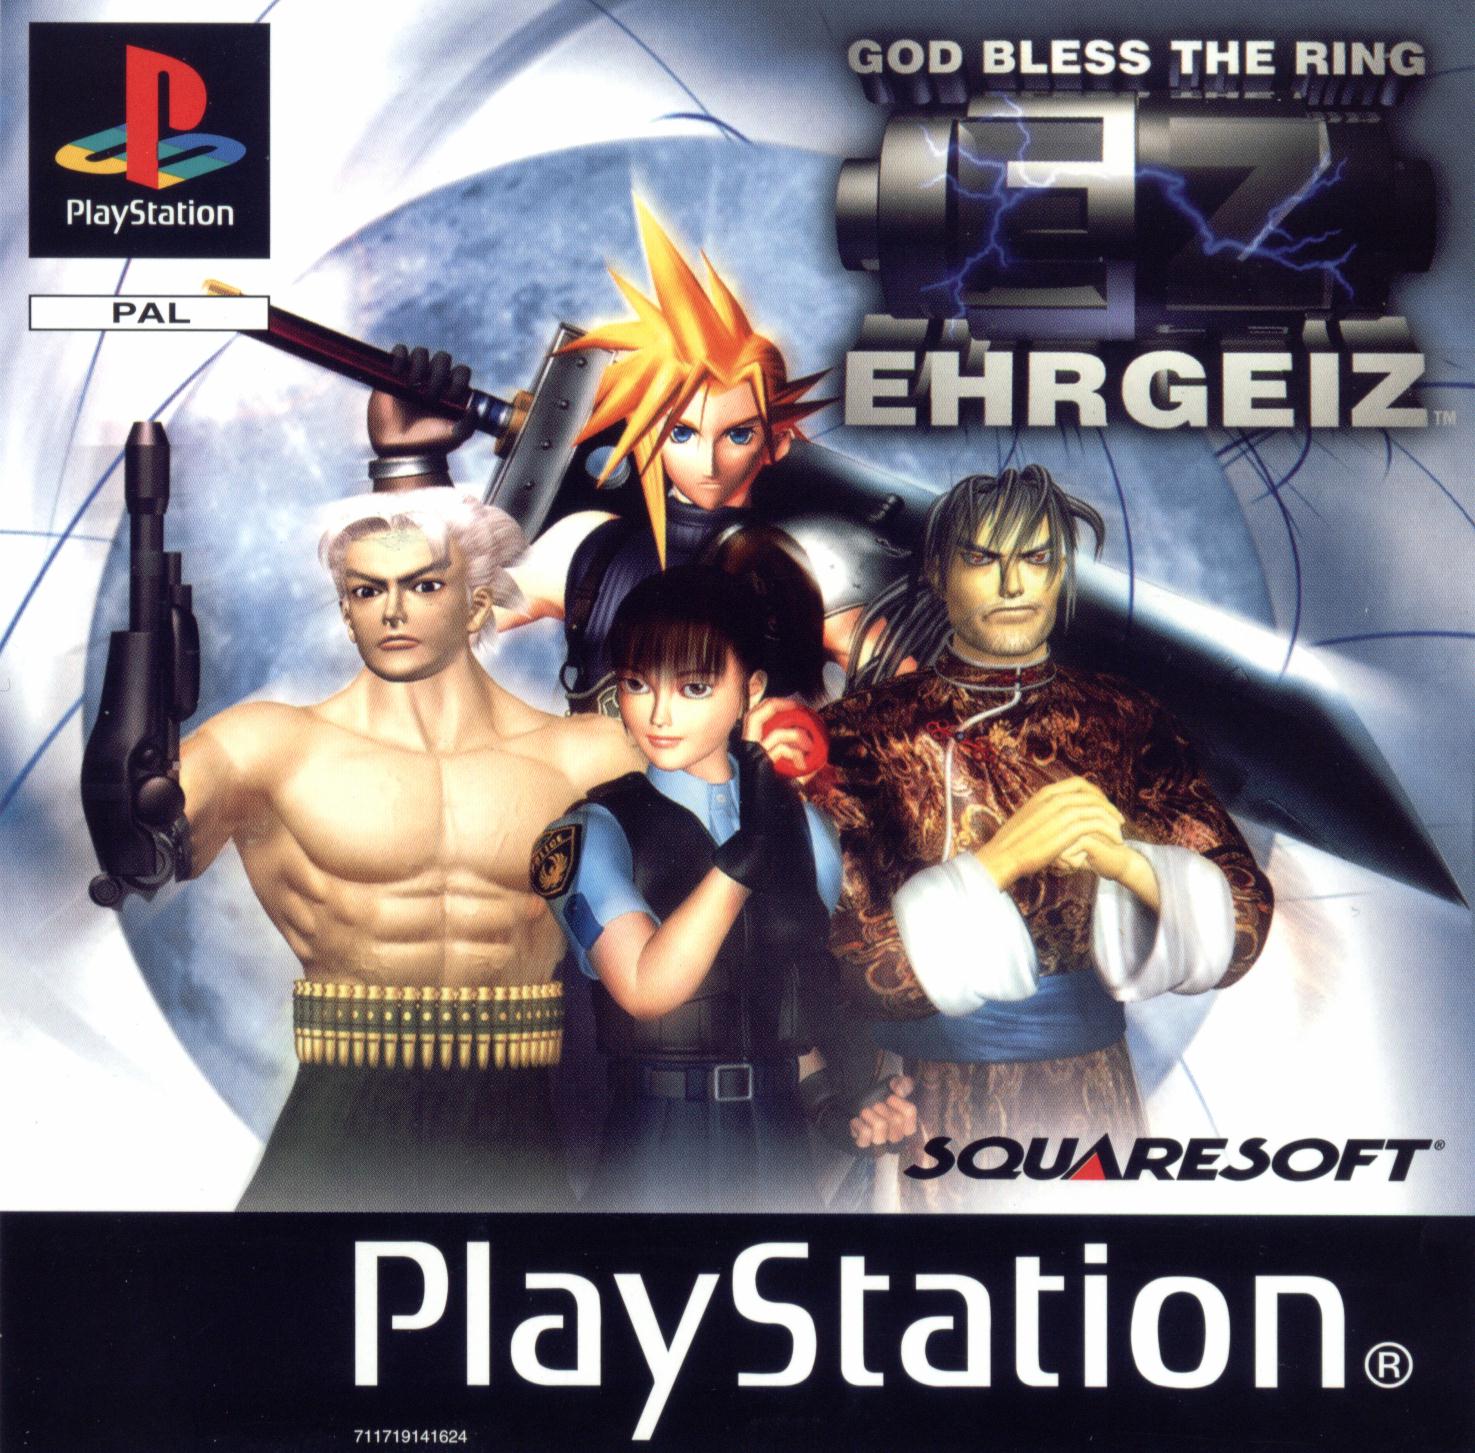 Ehrgeiz: God Bless the Ring [PS1] - Fighting with the characters of Final Fantasy